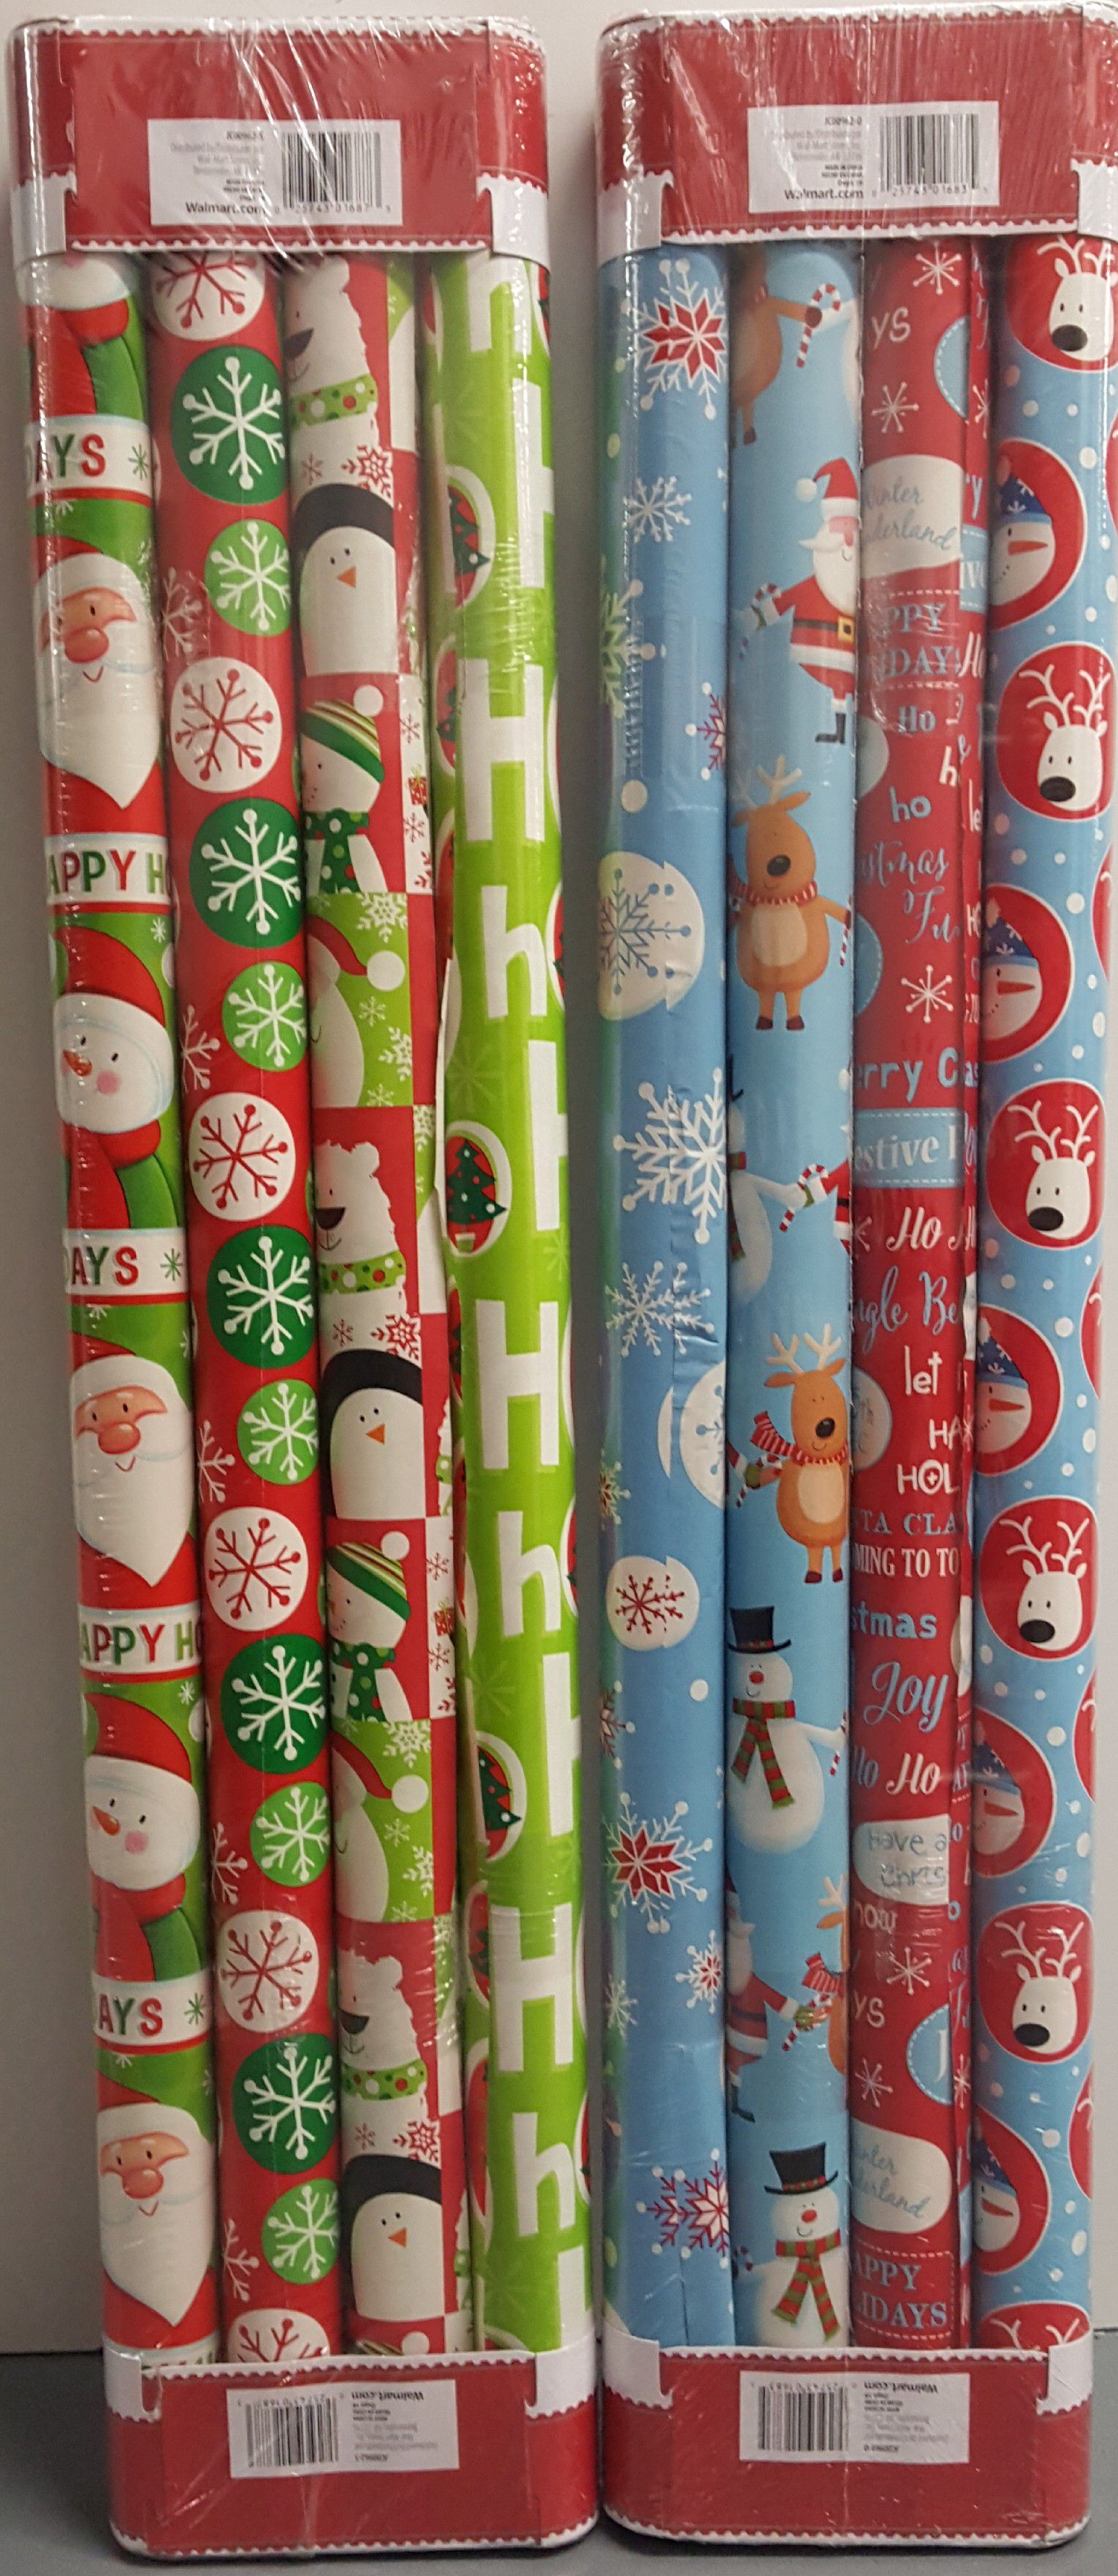 Christmas wrapping papers total of 16 rolls